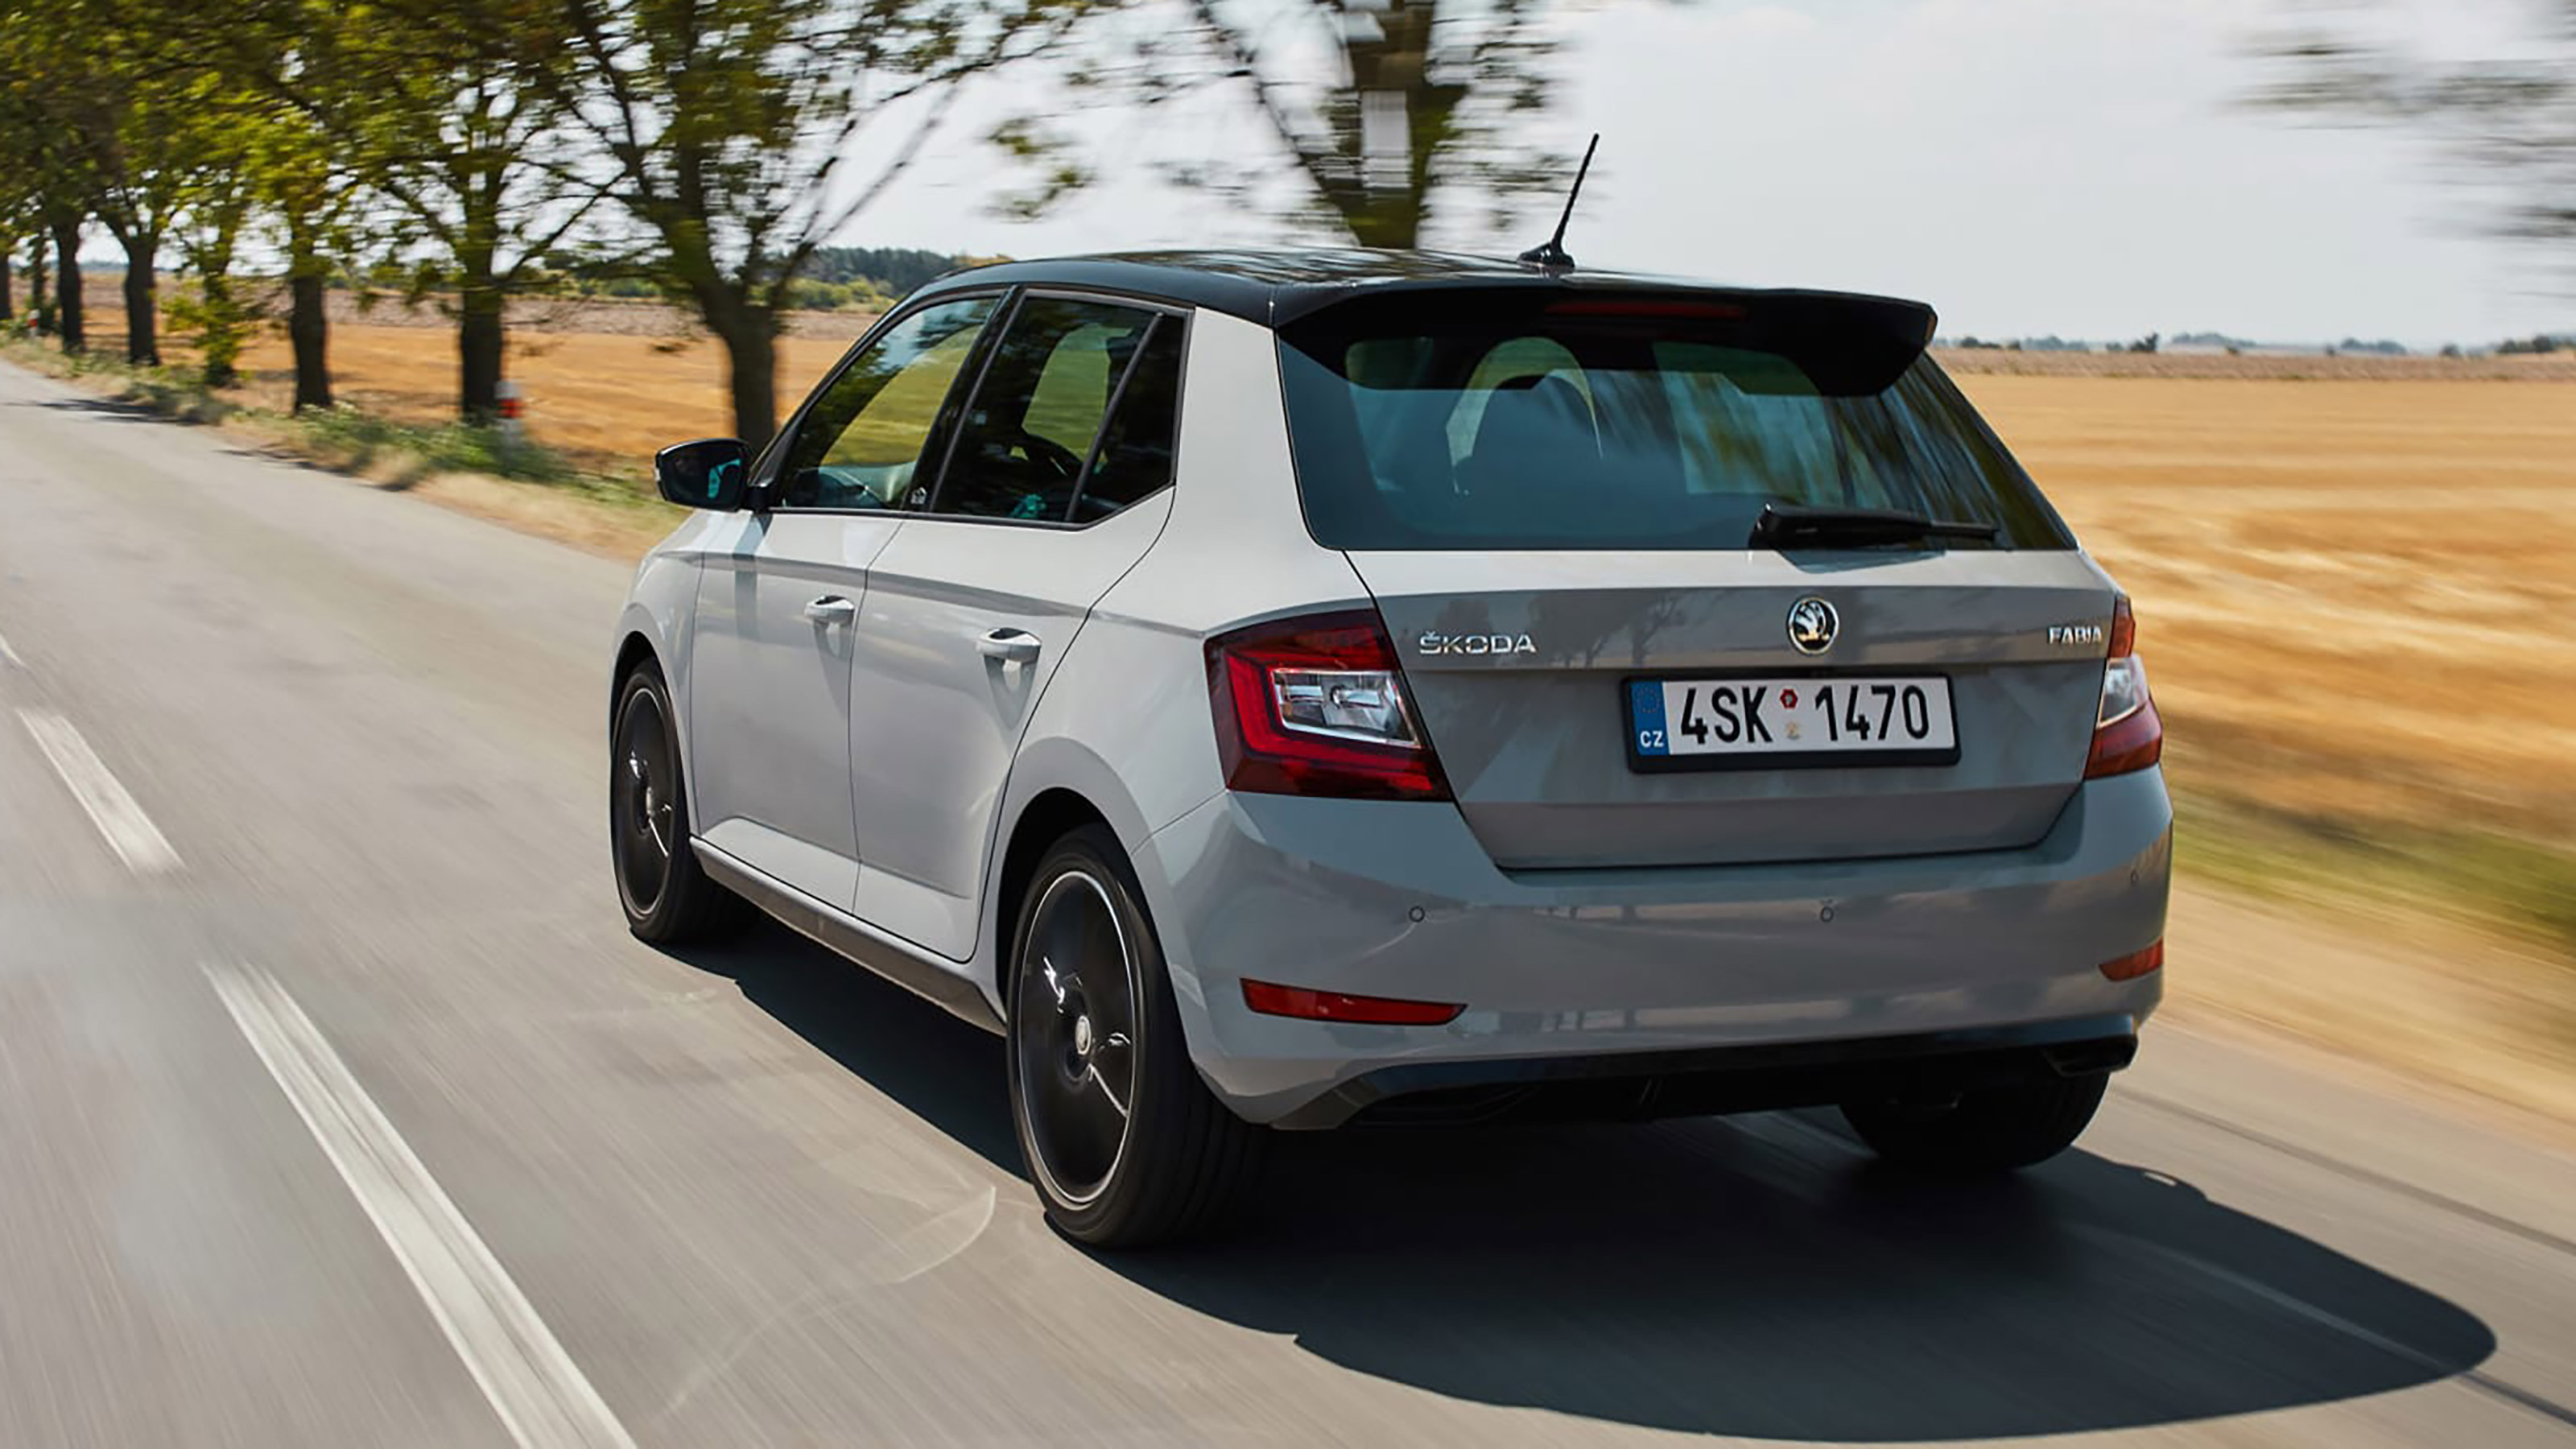 2020 Skoda Fabia Review A Worthy Rival To The Ford Fiesta Evo